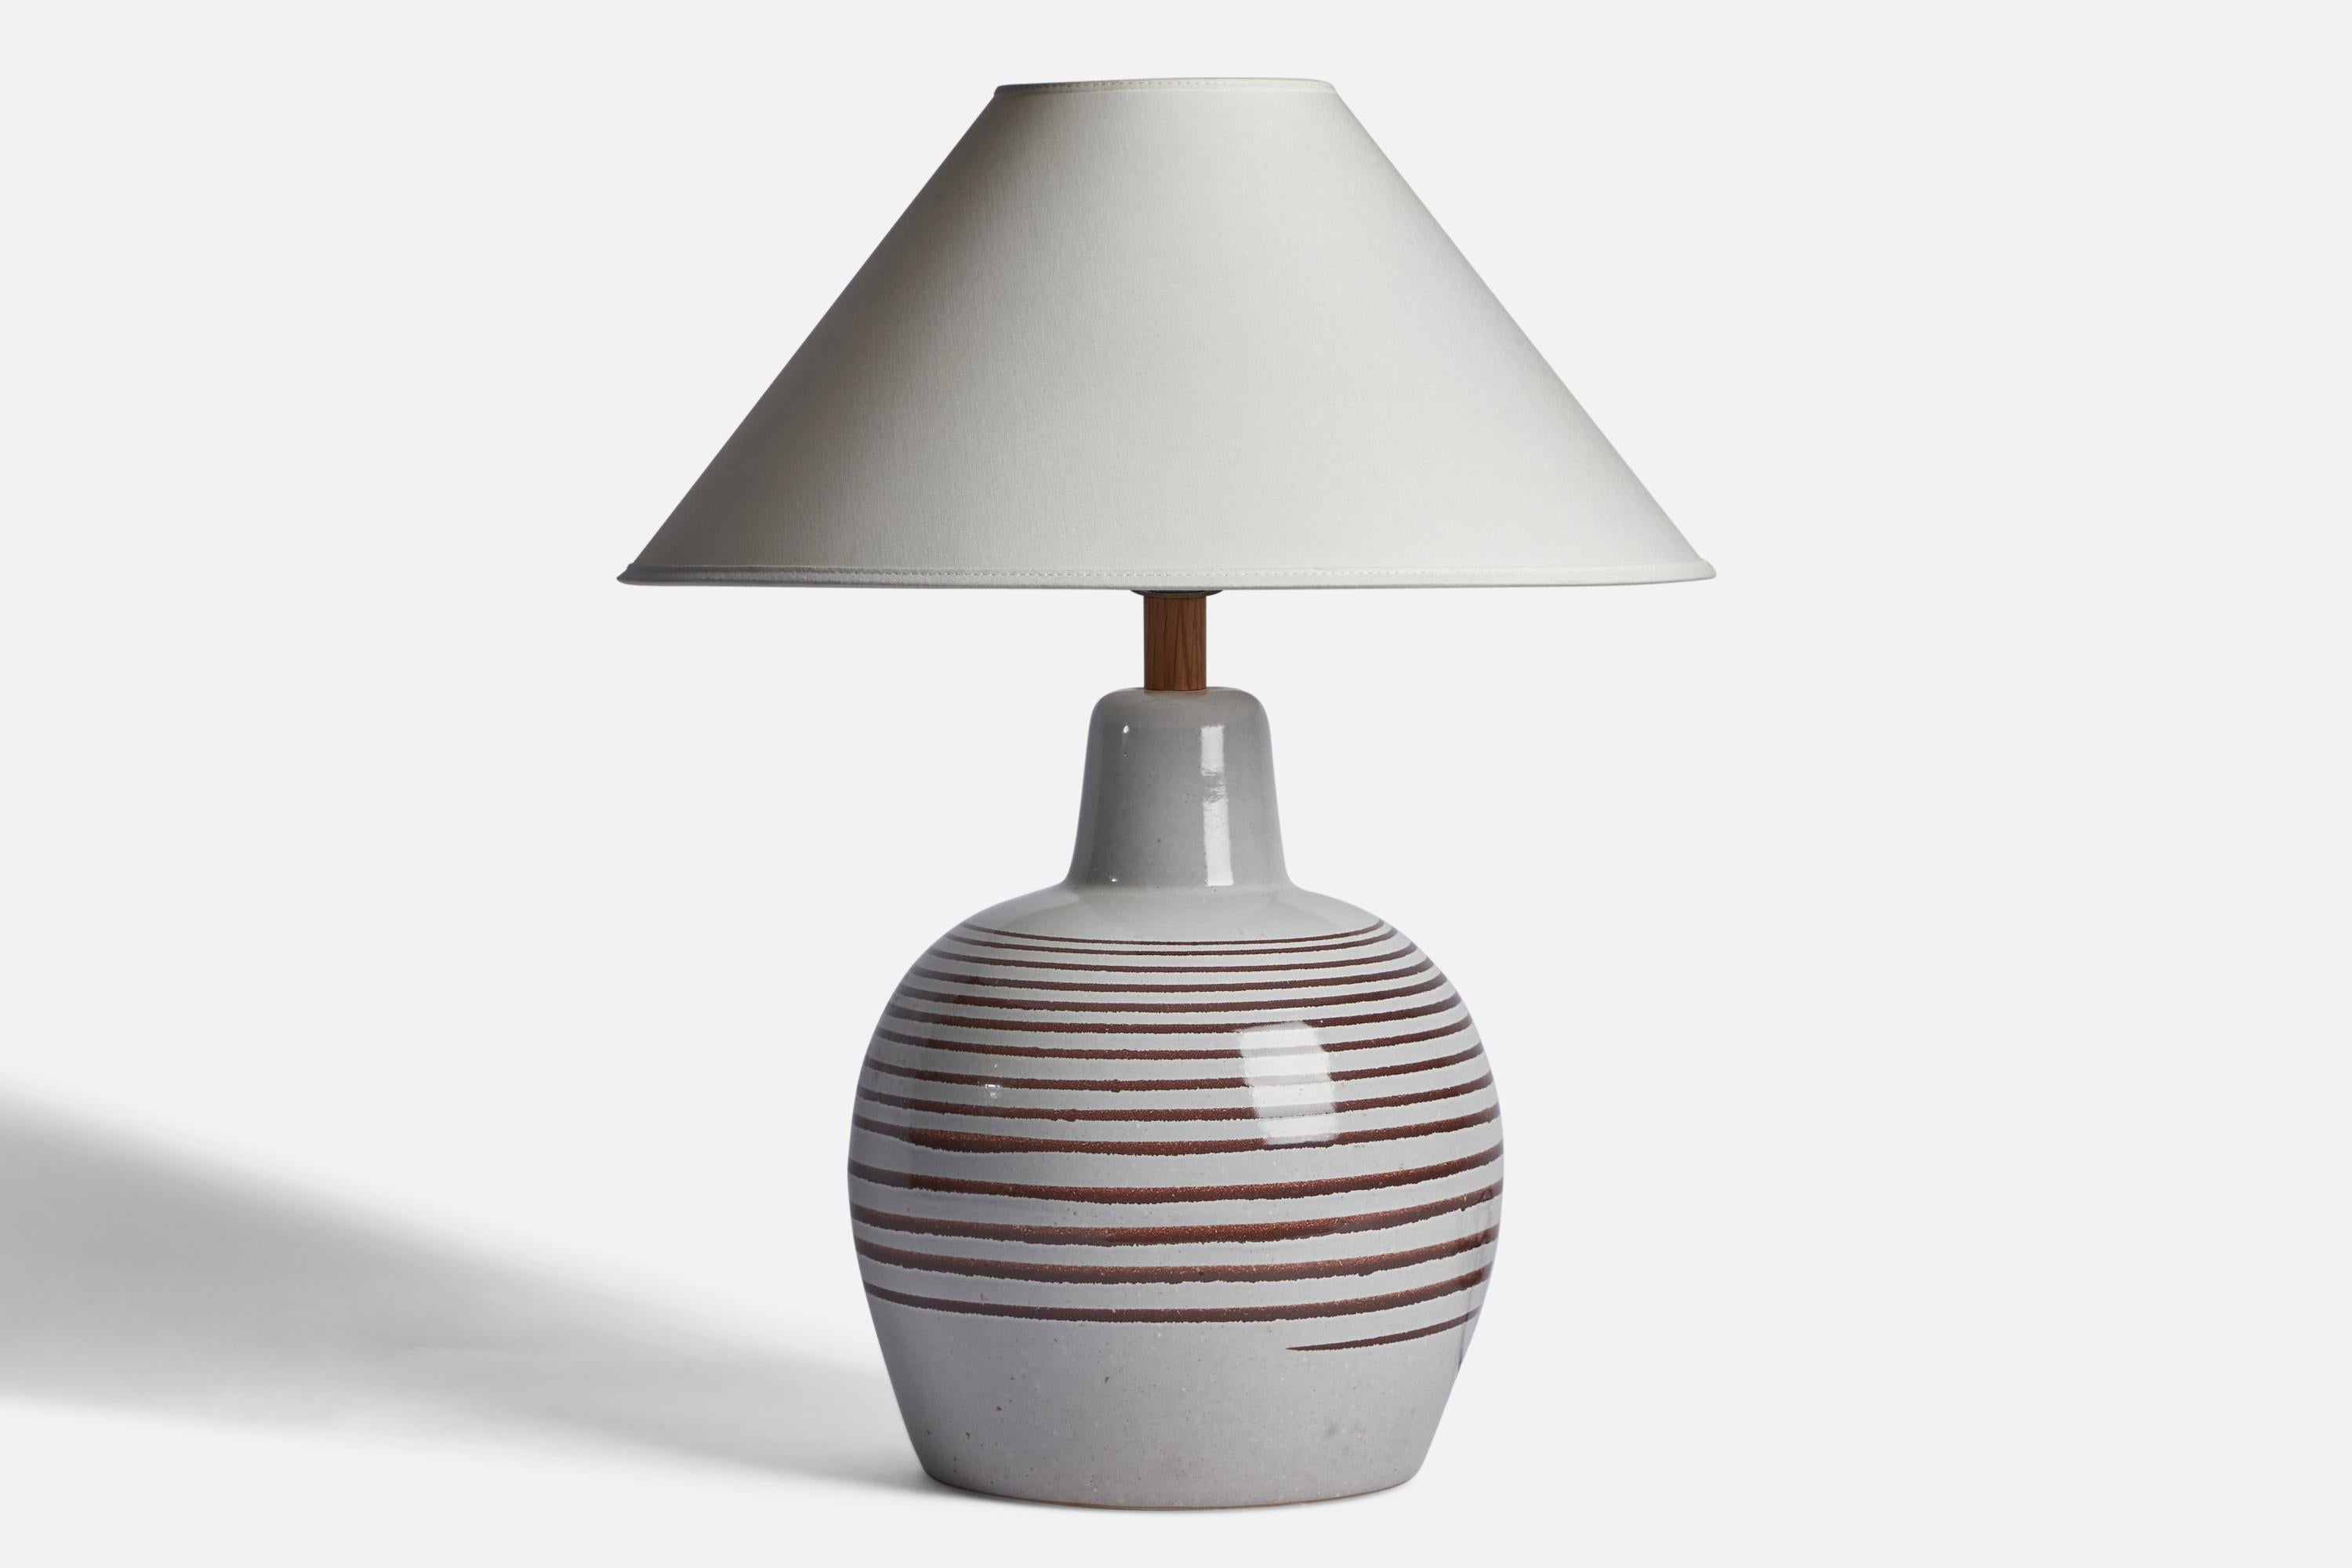 An off-white and brown-glazed ceramic and walnut table lamp designed by Jane & Gordon Martz and produced by Marshall Studios, USA, 1960s.

Dimensions of Lamp (inches): 16.15” H x 9.25” Diameter
Dimensions of Shade (inches): 4.5” Top Diameter x 16”